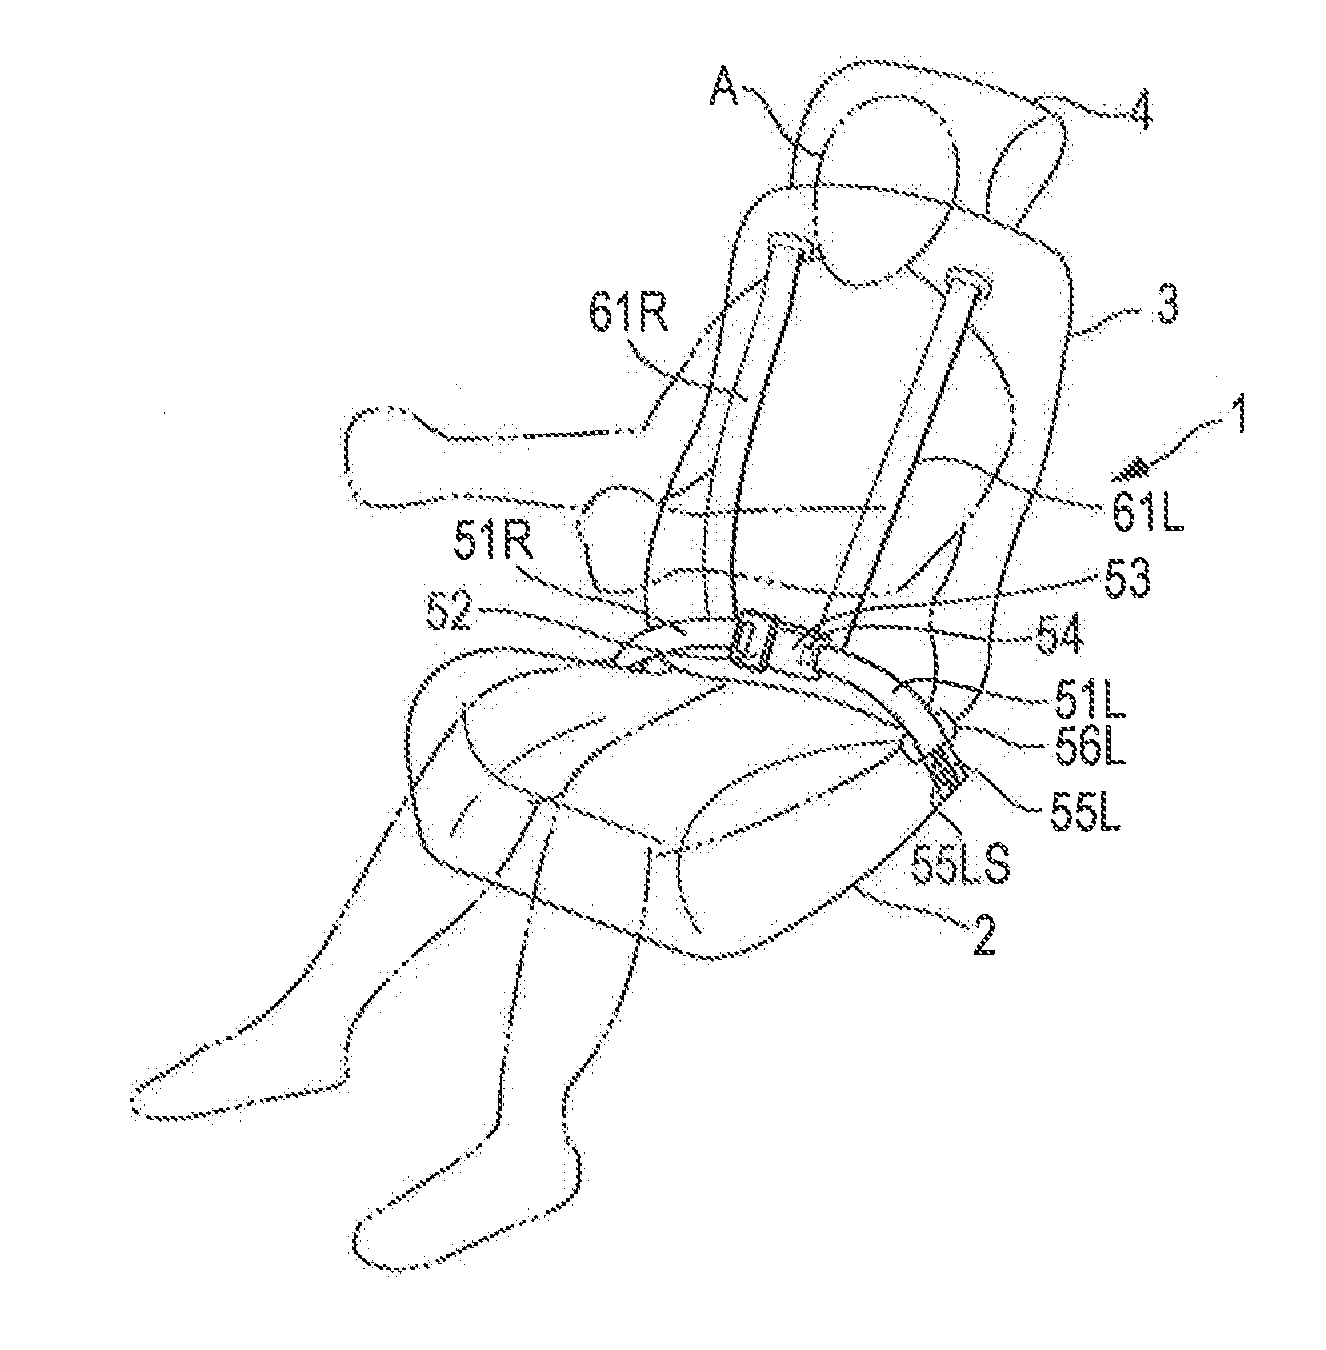 Four-point seat belt device